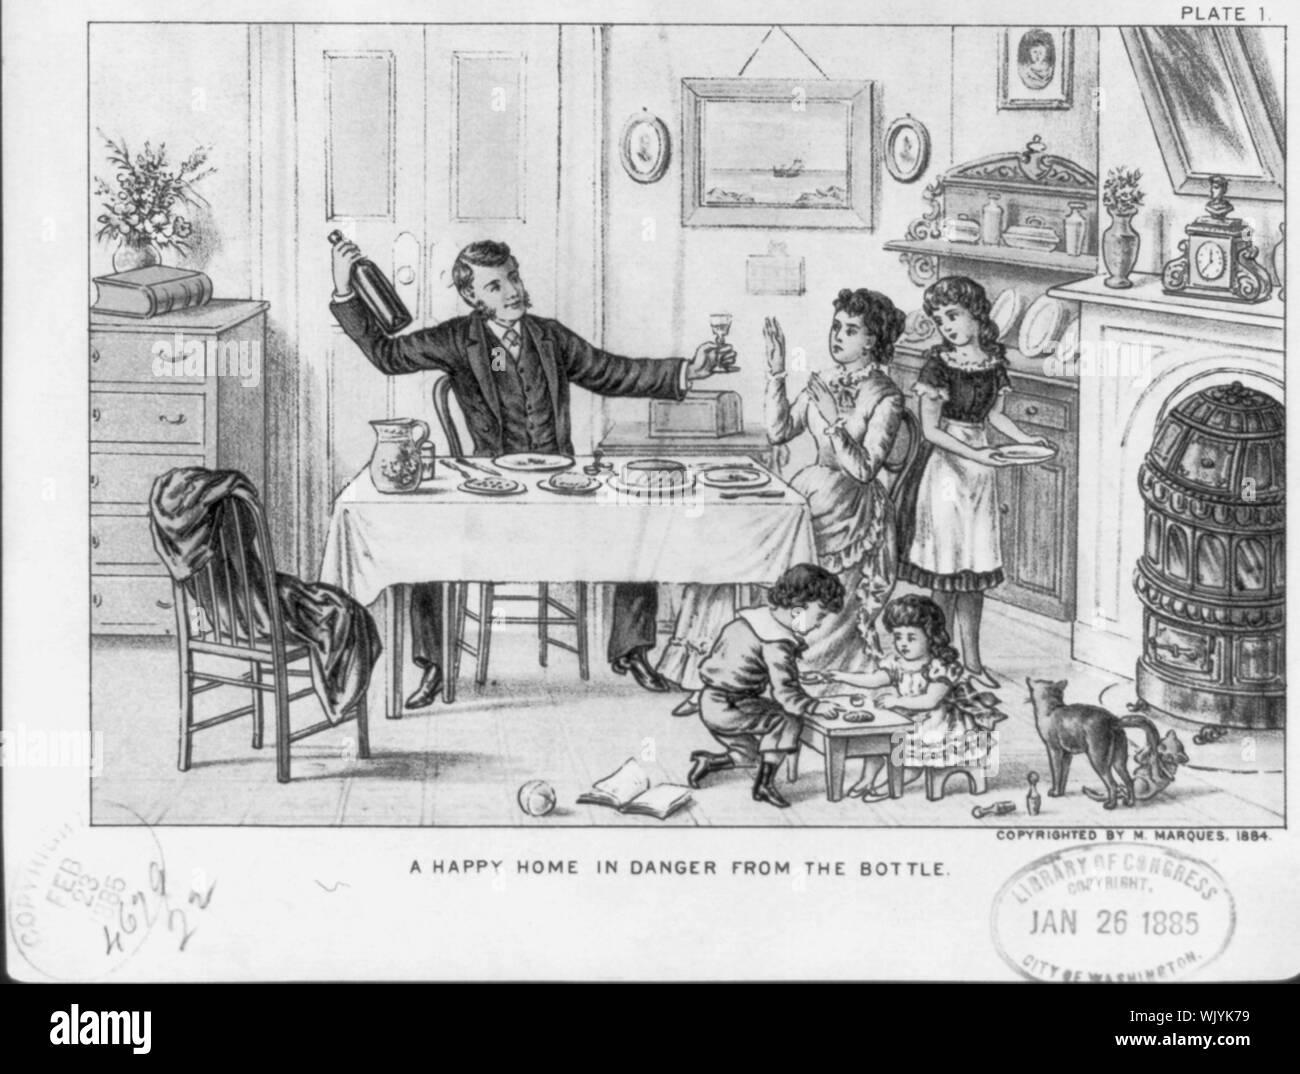 Illustration of the dangers of alcoholic beverages: A happy home in danger from the bottle, pl. 1 Stock Photo